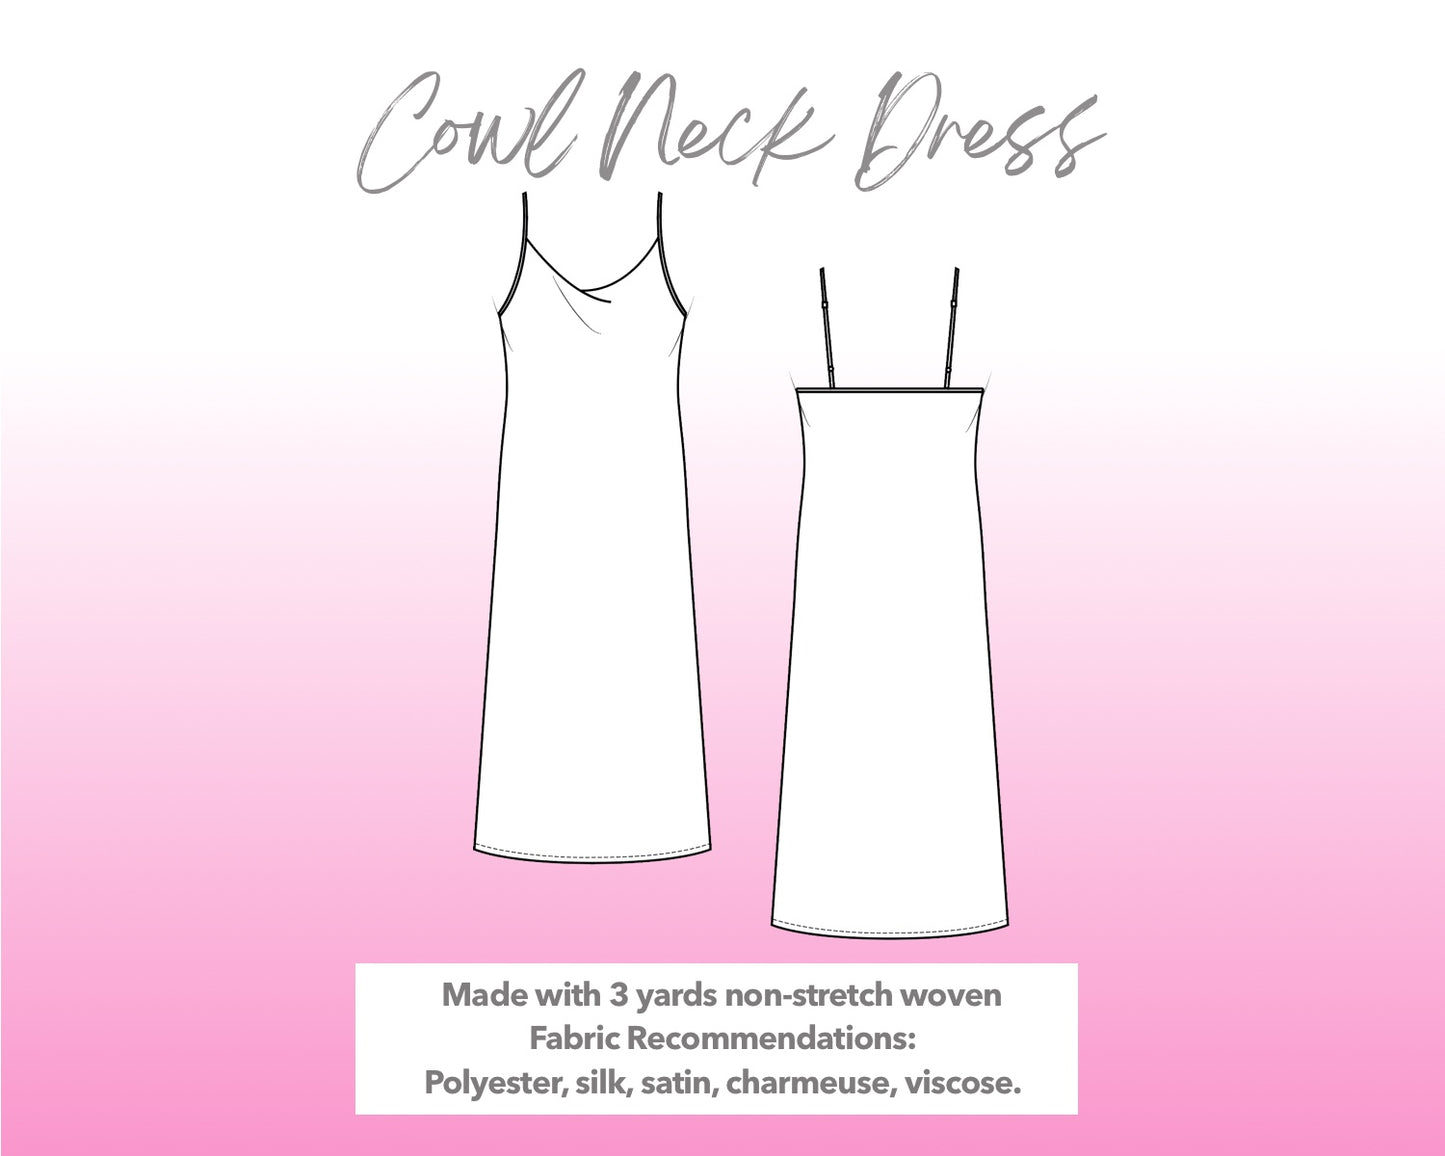 Illustration and detailed description for Cowl Neck Midi Dress sewing pattern.